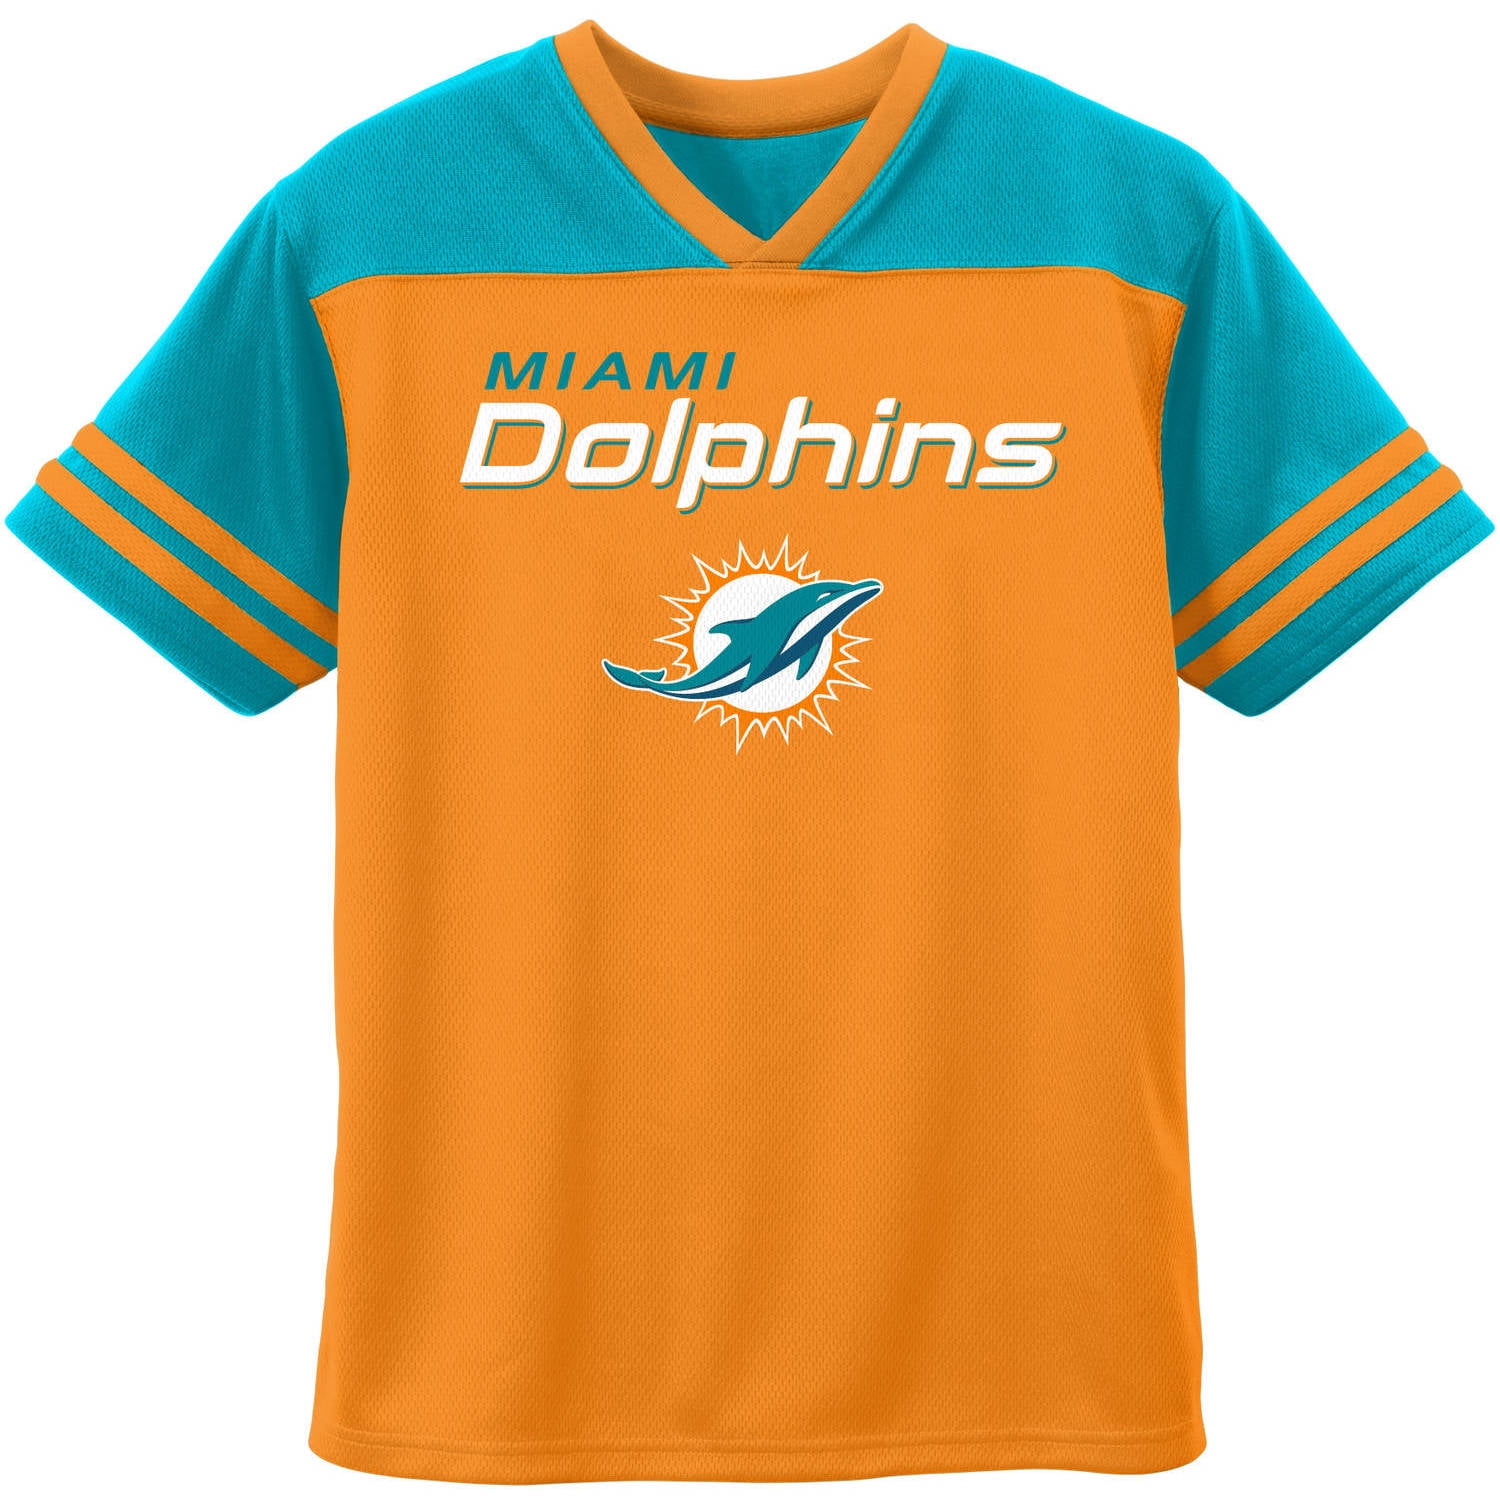 NFL Miami Dolphins Youth Short Sleeve Graphic Tee - Walmart.com